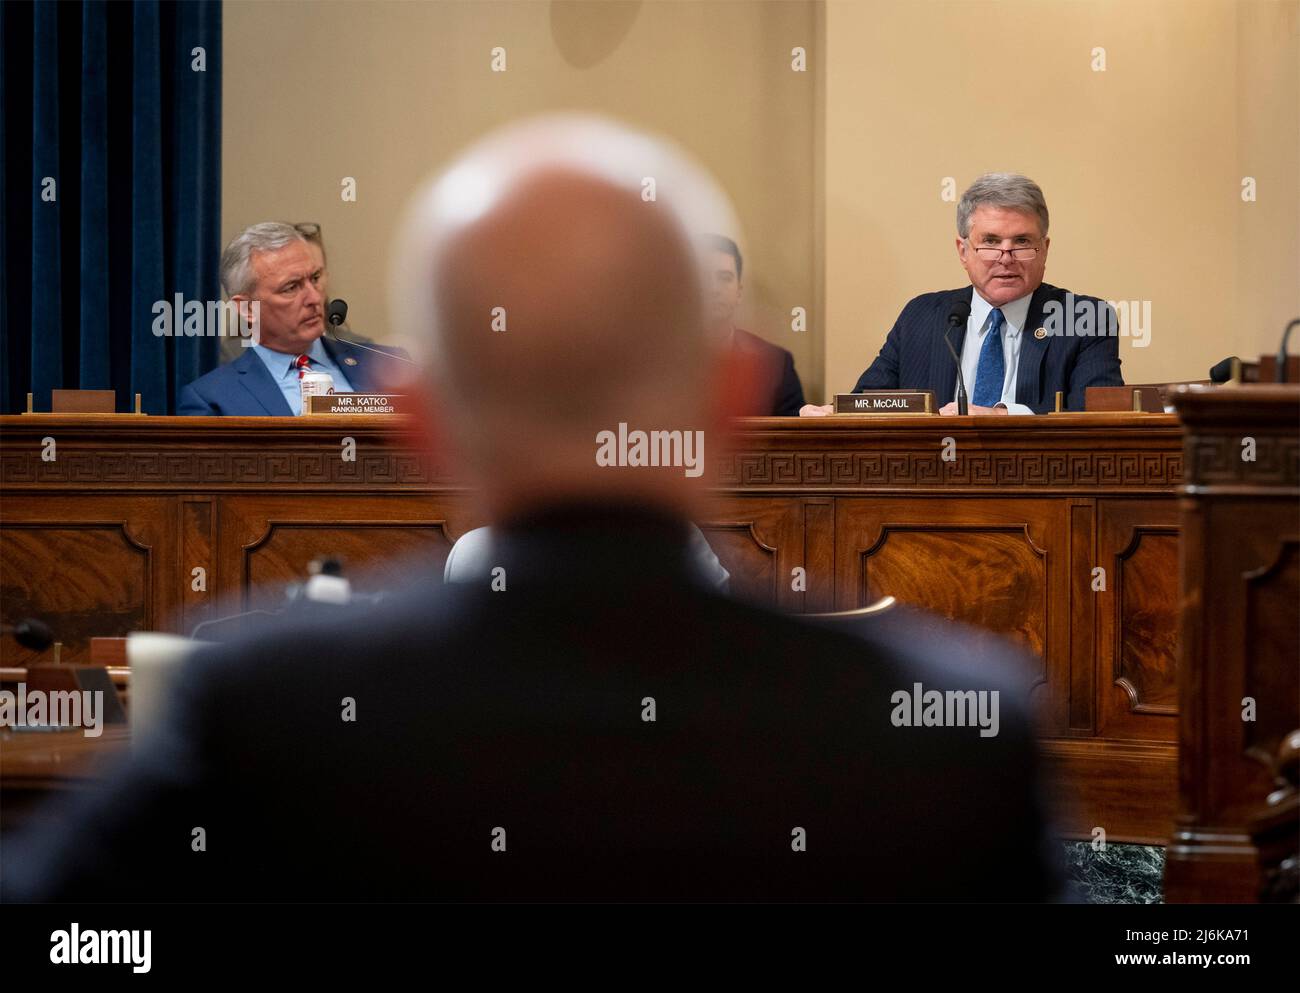 Washington, United States of America. 27 April, 2022. U.S Rep. Michael McCaul of Texas, right, questions Homeland Security Secretary Alejandro Mayorkas during testimony at the House Committee on Appropriations, on Capitol Hill April 28, 2022 in Washington, D.C.  Credit: Benjamin Applebaum/DHS Photo/Alamy Live News Stock Photo